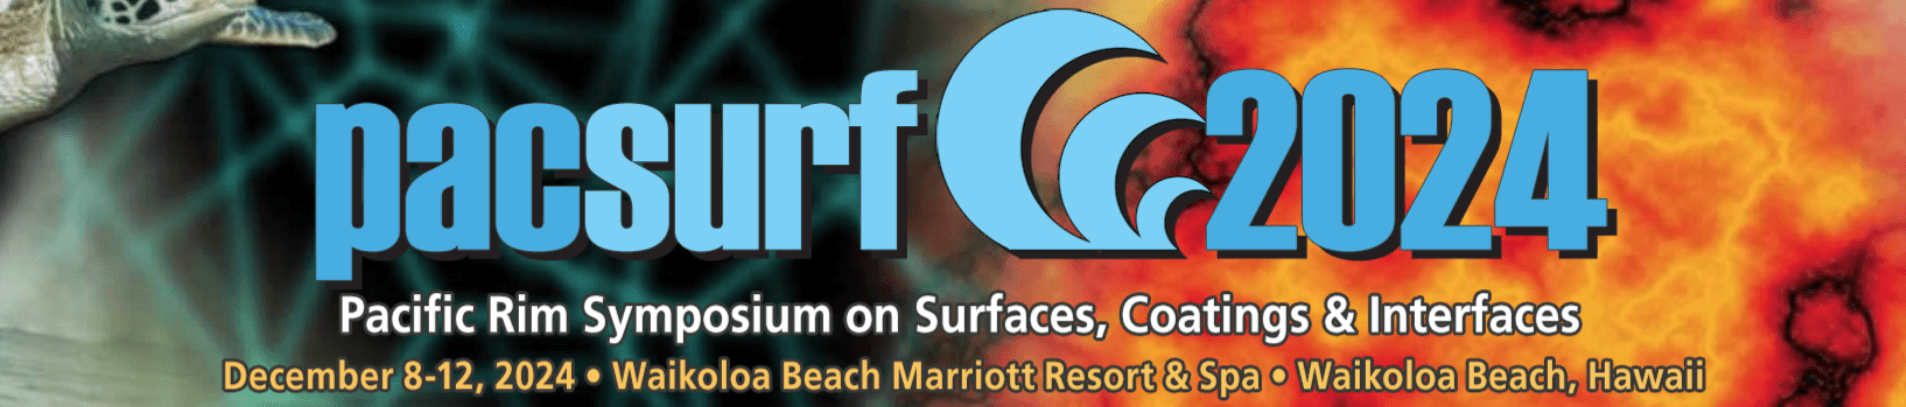 PacSurf 2024 - Pacific Rim Symposium on Surfaces, Coatings &amp; Interfaces